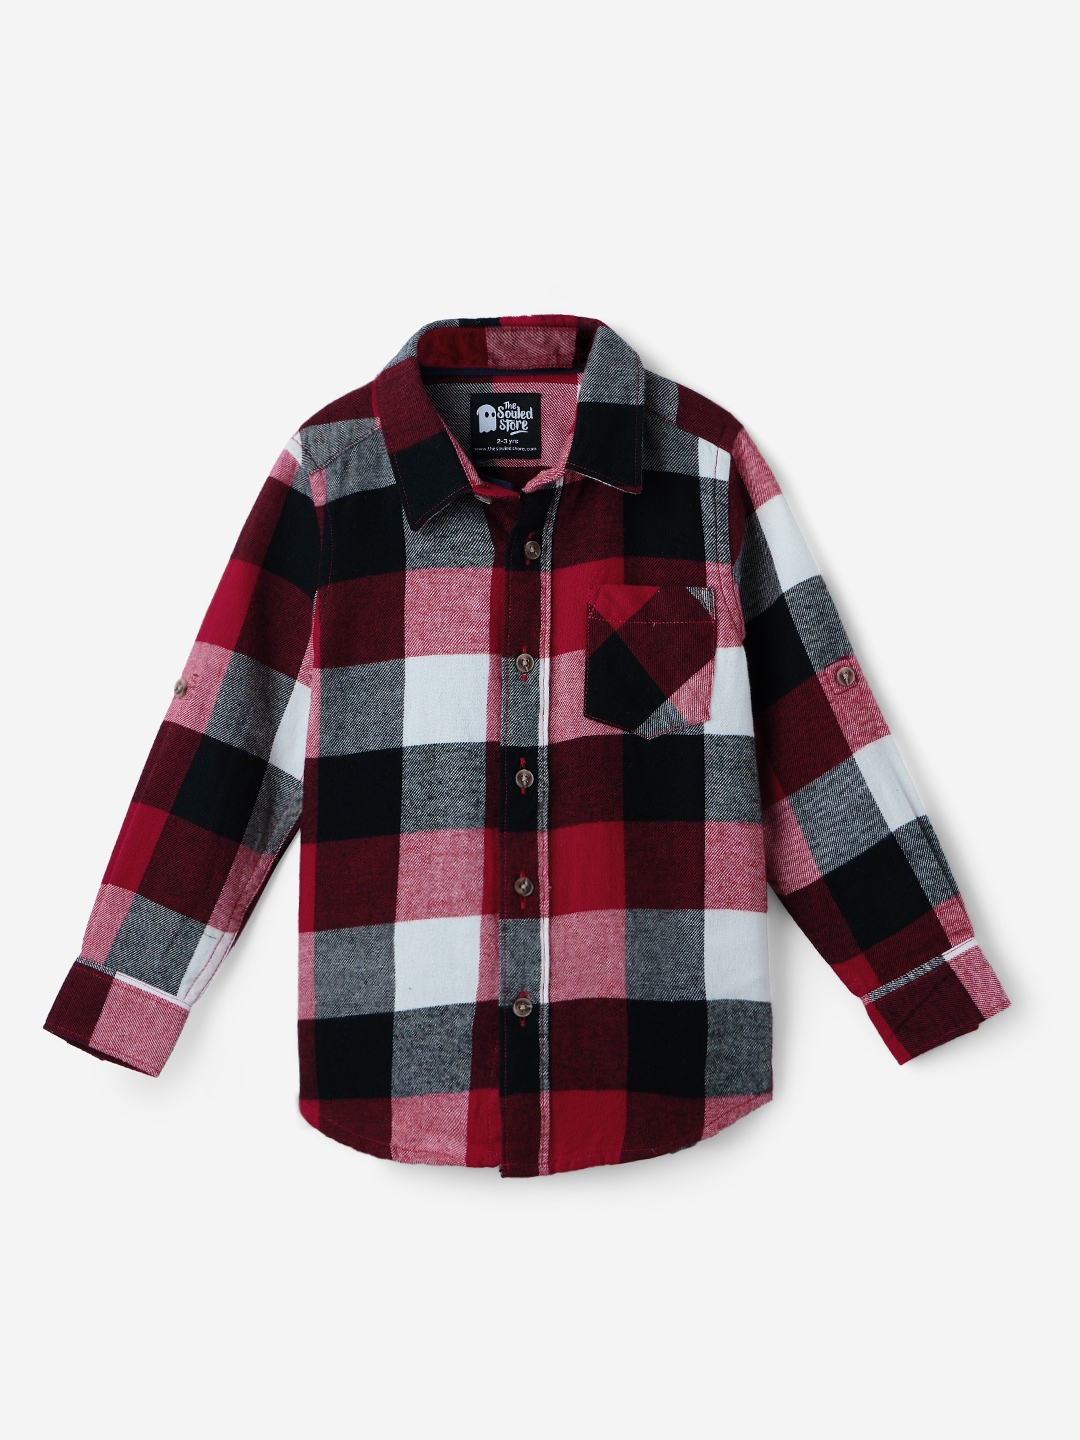 The Souled Store | Boys Plaid: Red, Black and White Boys Cotton Shirts